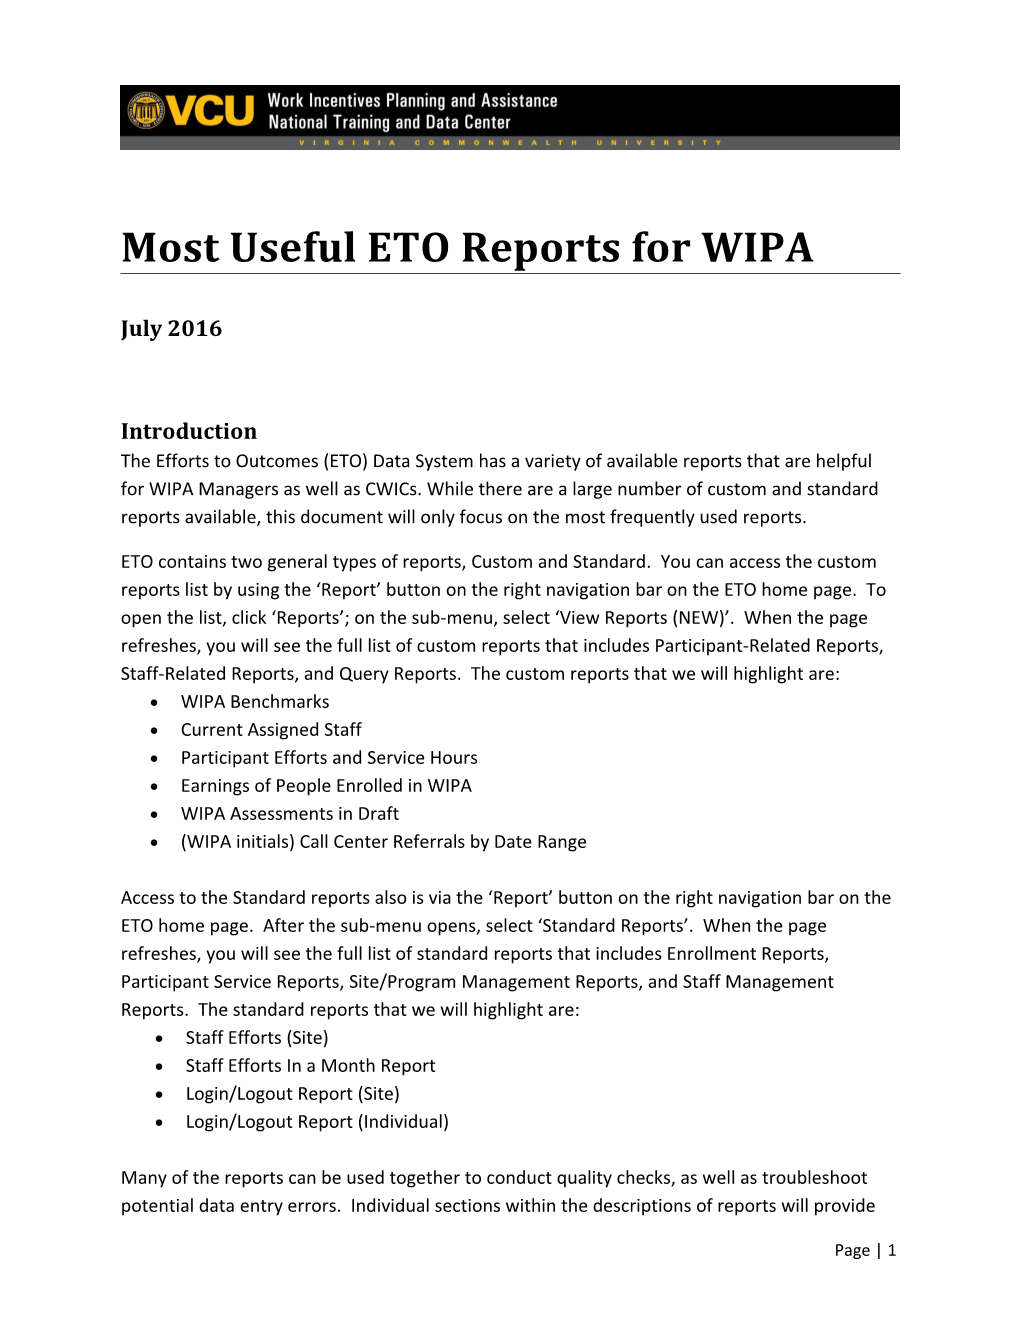 Most Useful ETO Reports for WIPA